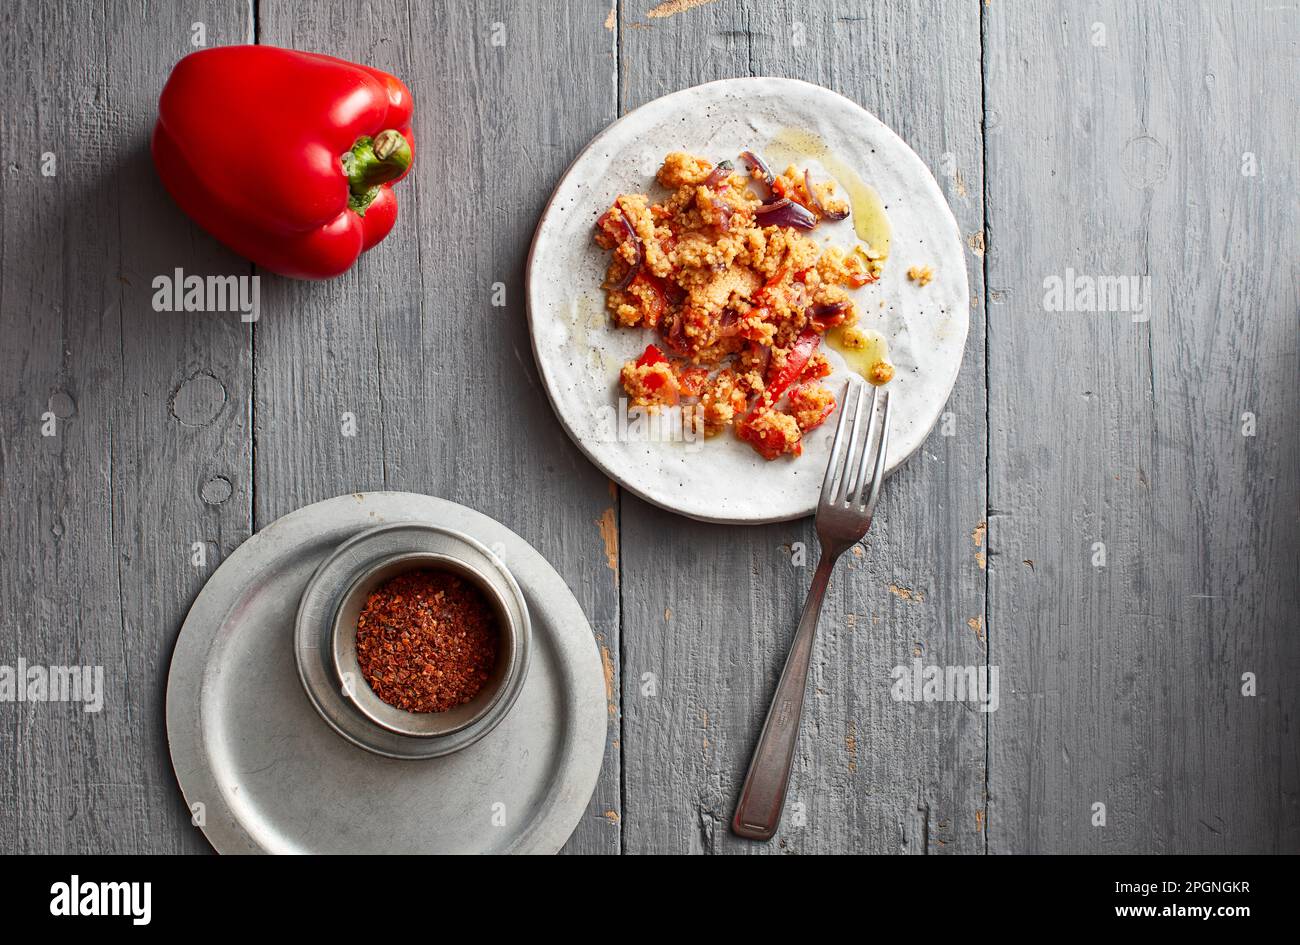 Raw bell pepper, chili powder and plate of ready-to-eat couscous Stock Photo